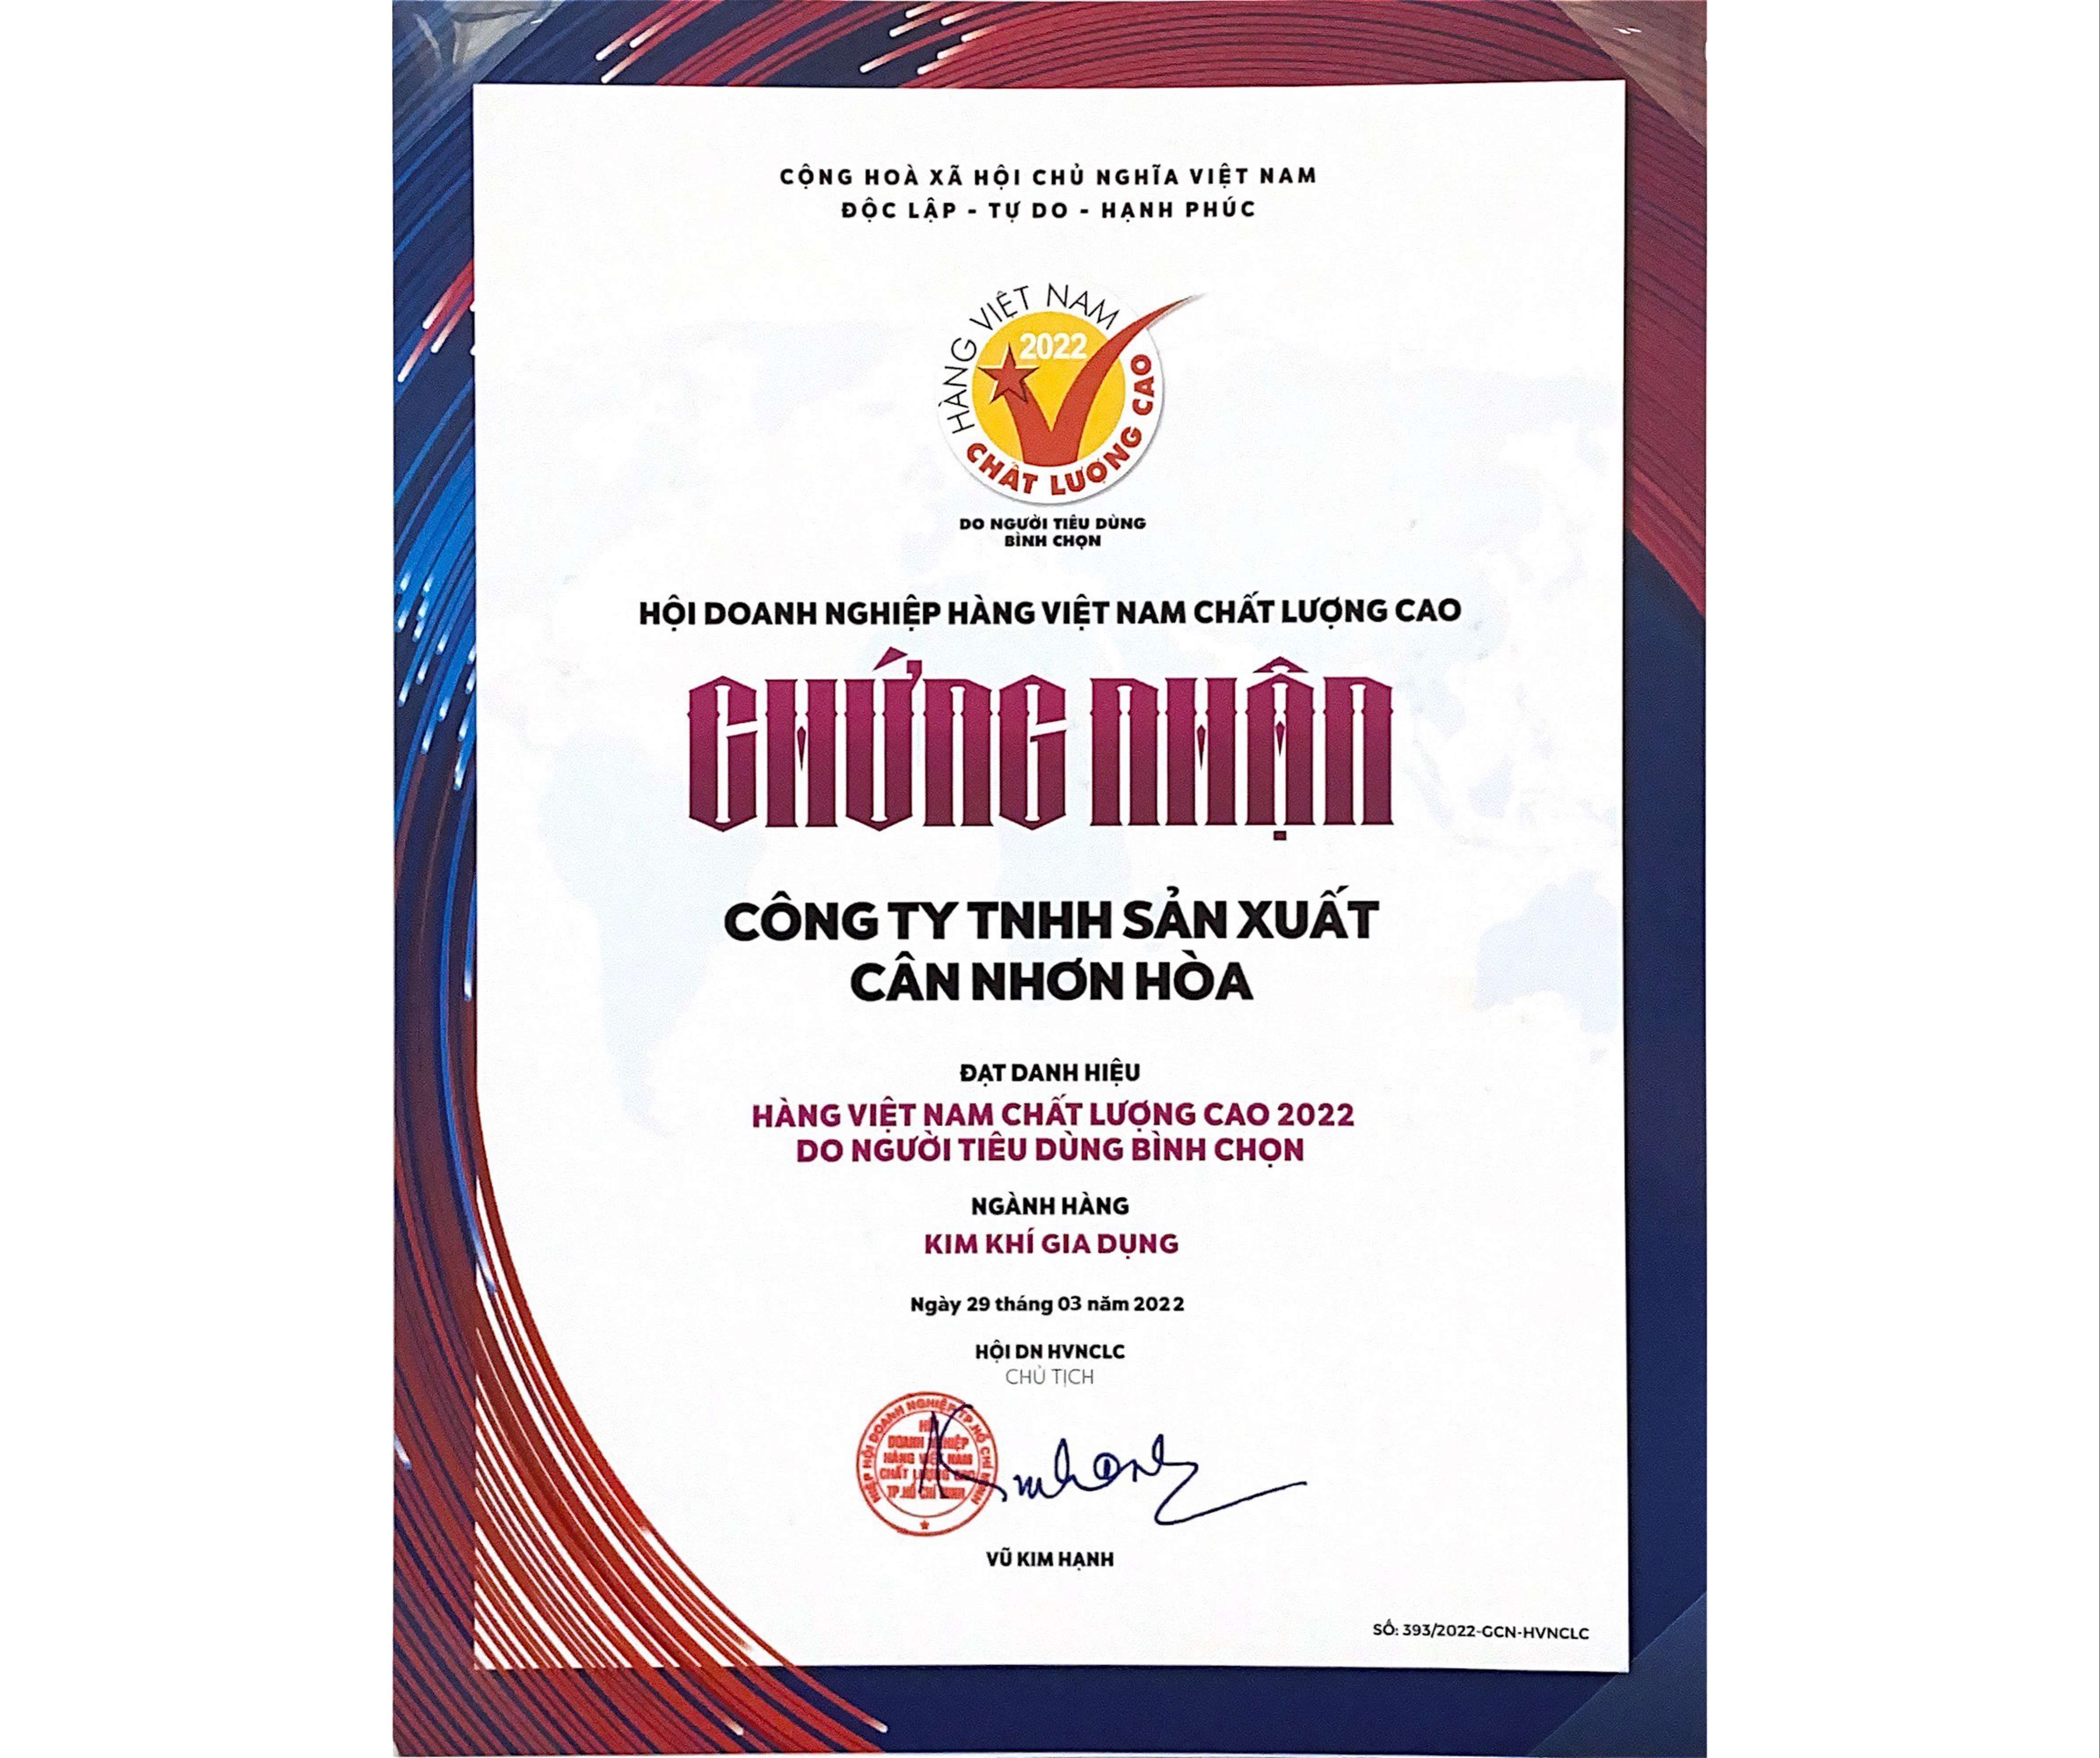 nhon-hoa-company-is-honored-to-win-the-title-of-high-quality-vietnamese-goods-in-2022-voted-by-consumers